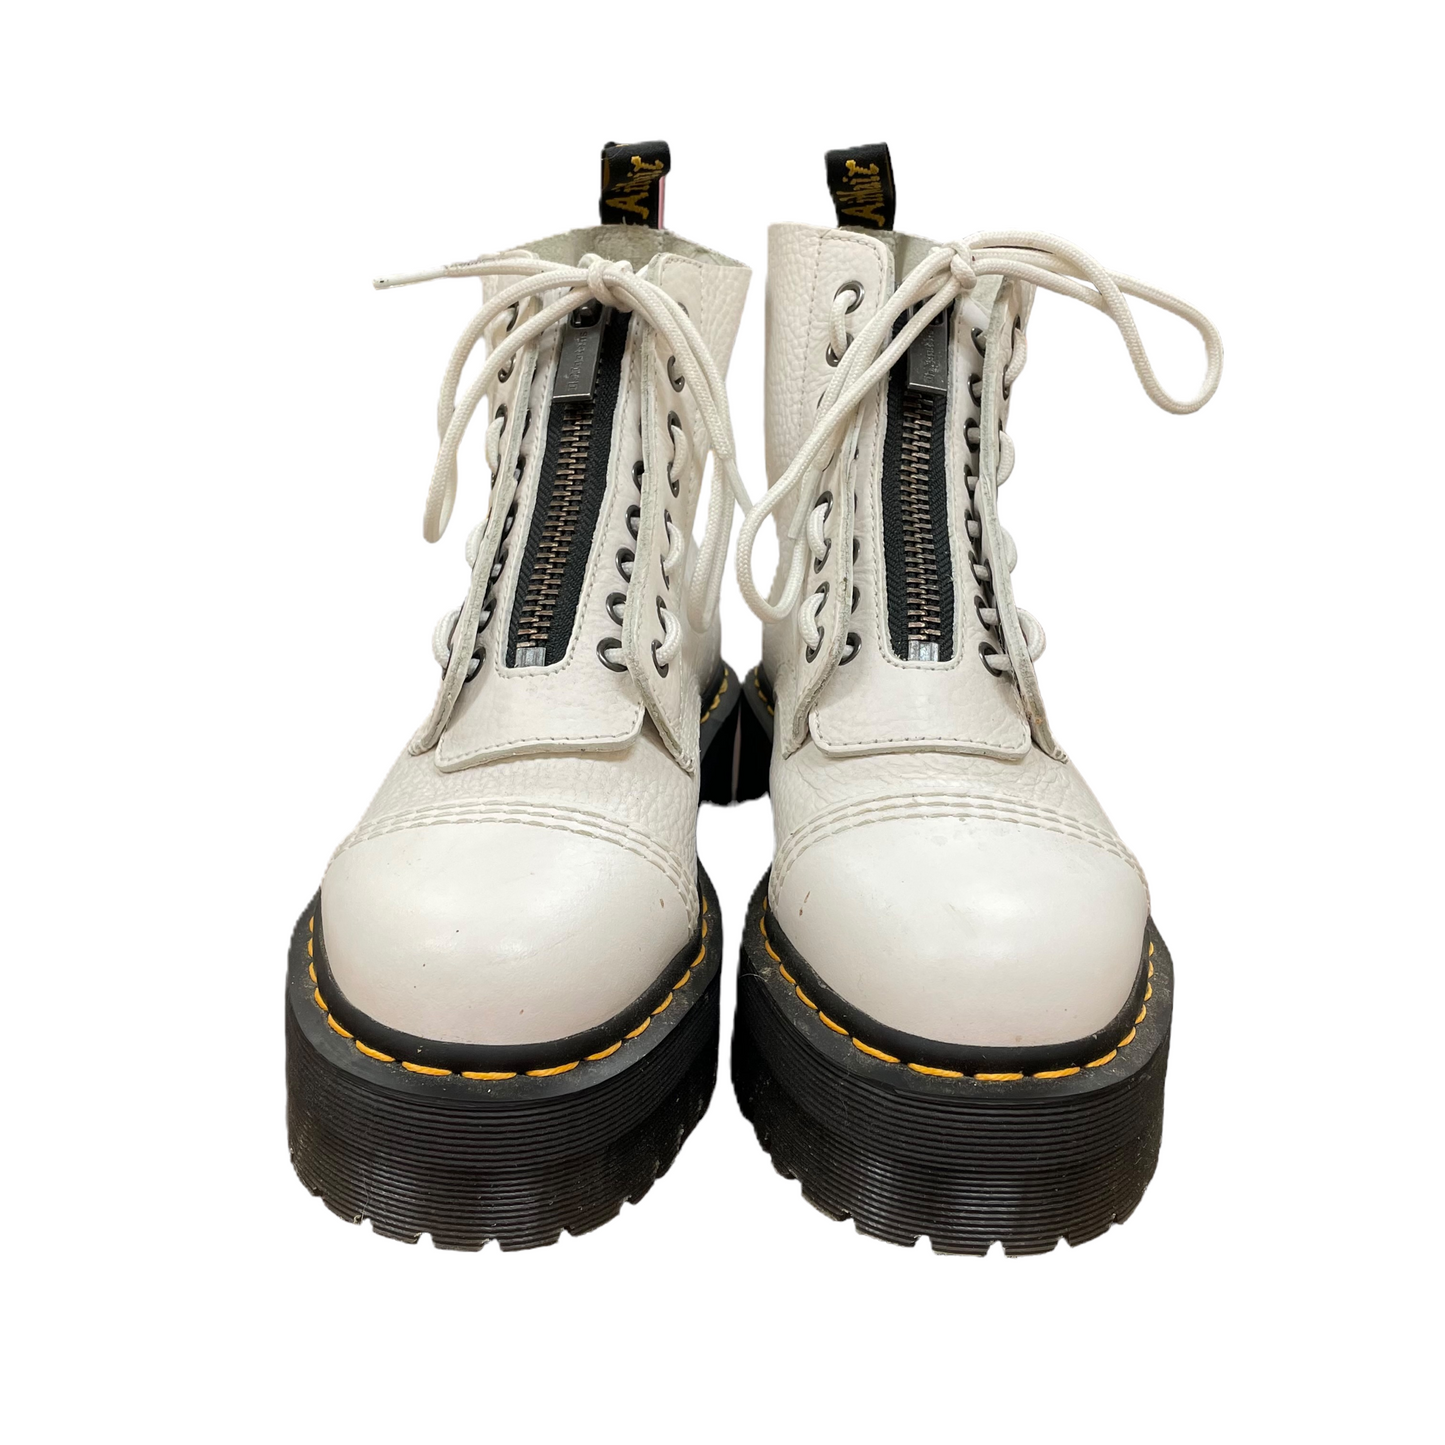 White Boots Combat By Dr Martens, Size: 8